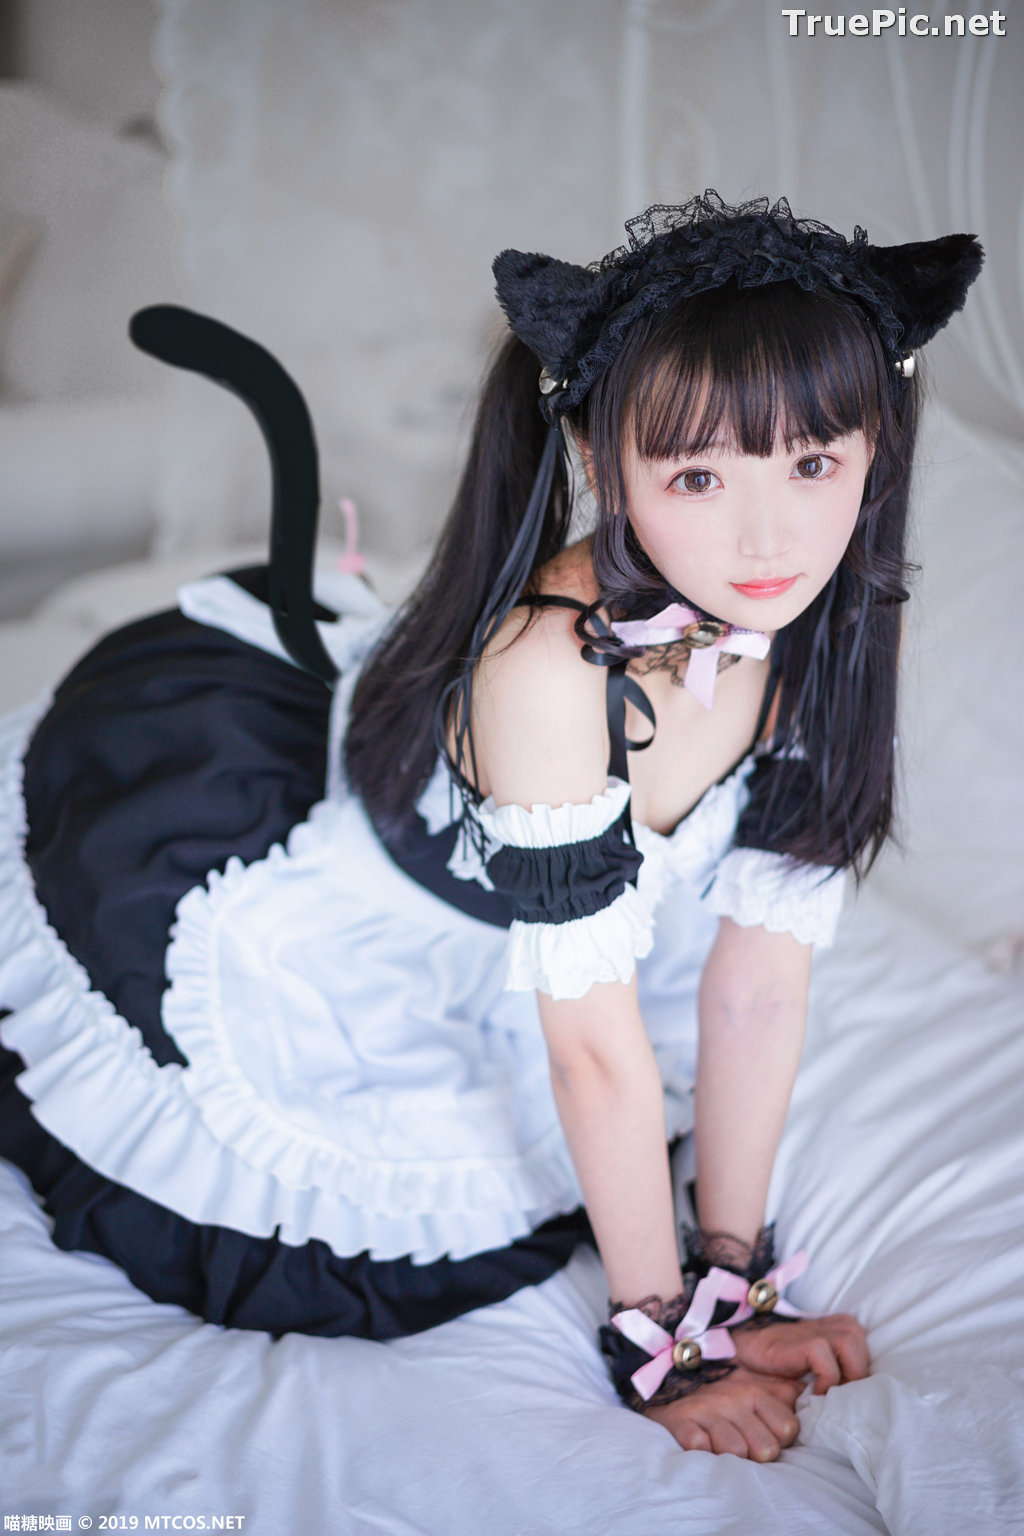 Image [MTCos] 喵糖映画 Vol.051 - Chinese Cute Model - Lovely Maid Cat - TruePic.net - Picture-23